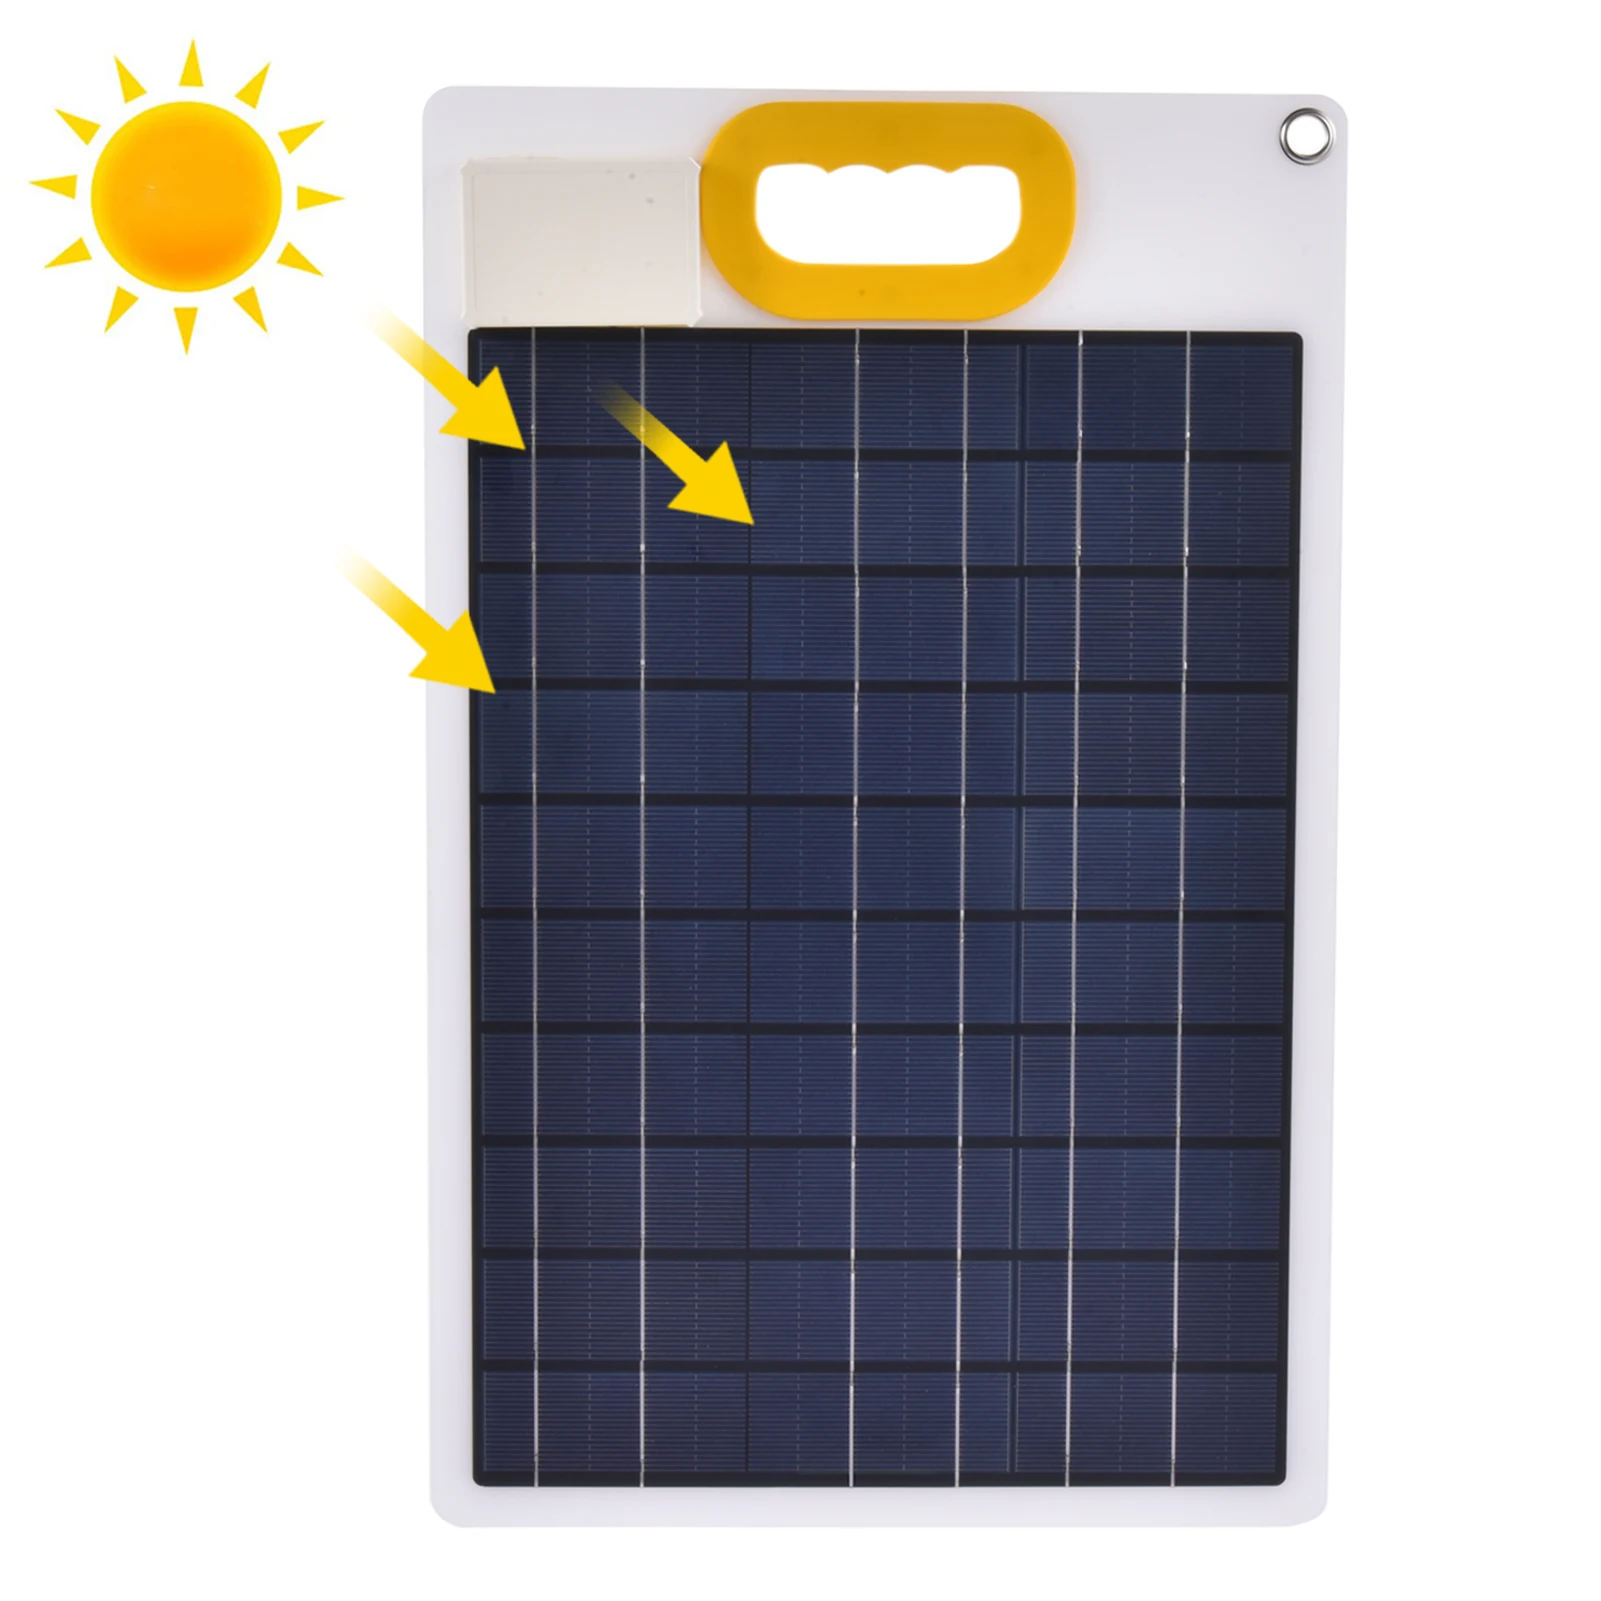 

30W Solar Charger Portable Solar Phone Charger Solar Panels Charger Quick Charge With 2 USB Ports & 1 USB C Practical For Travel